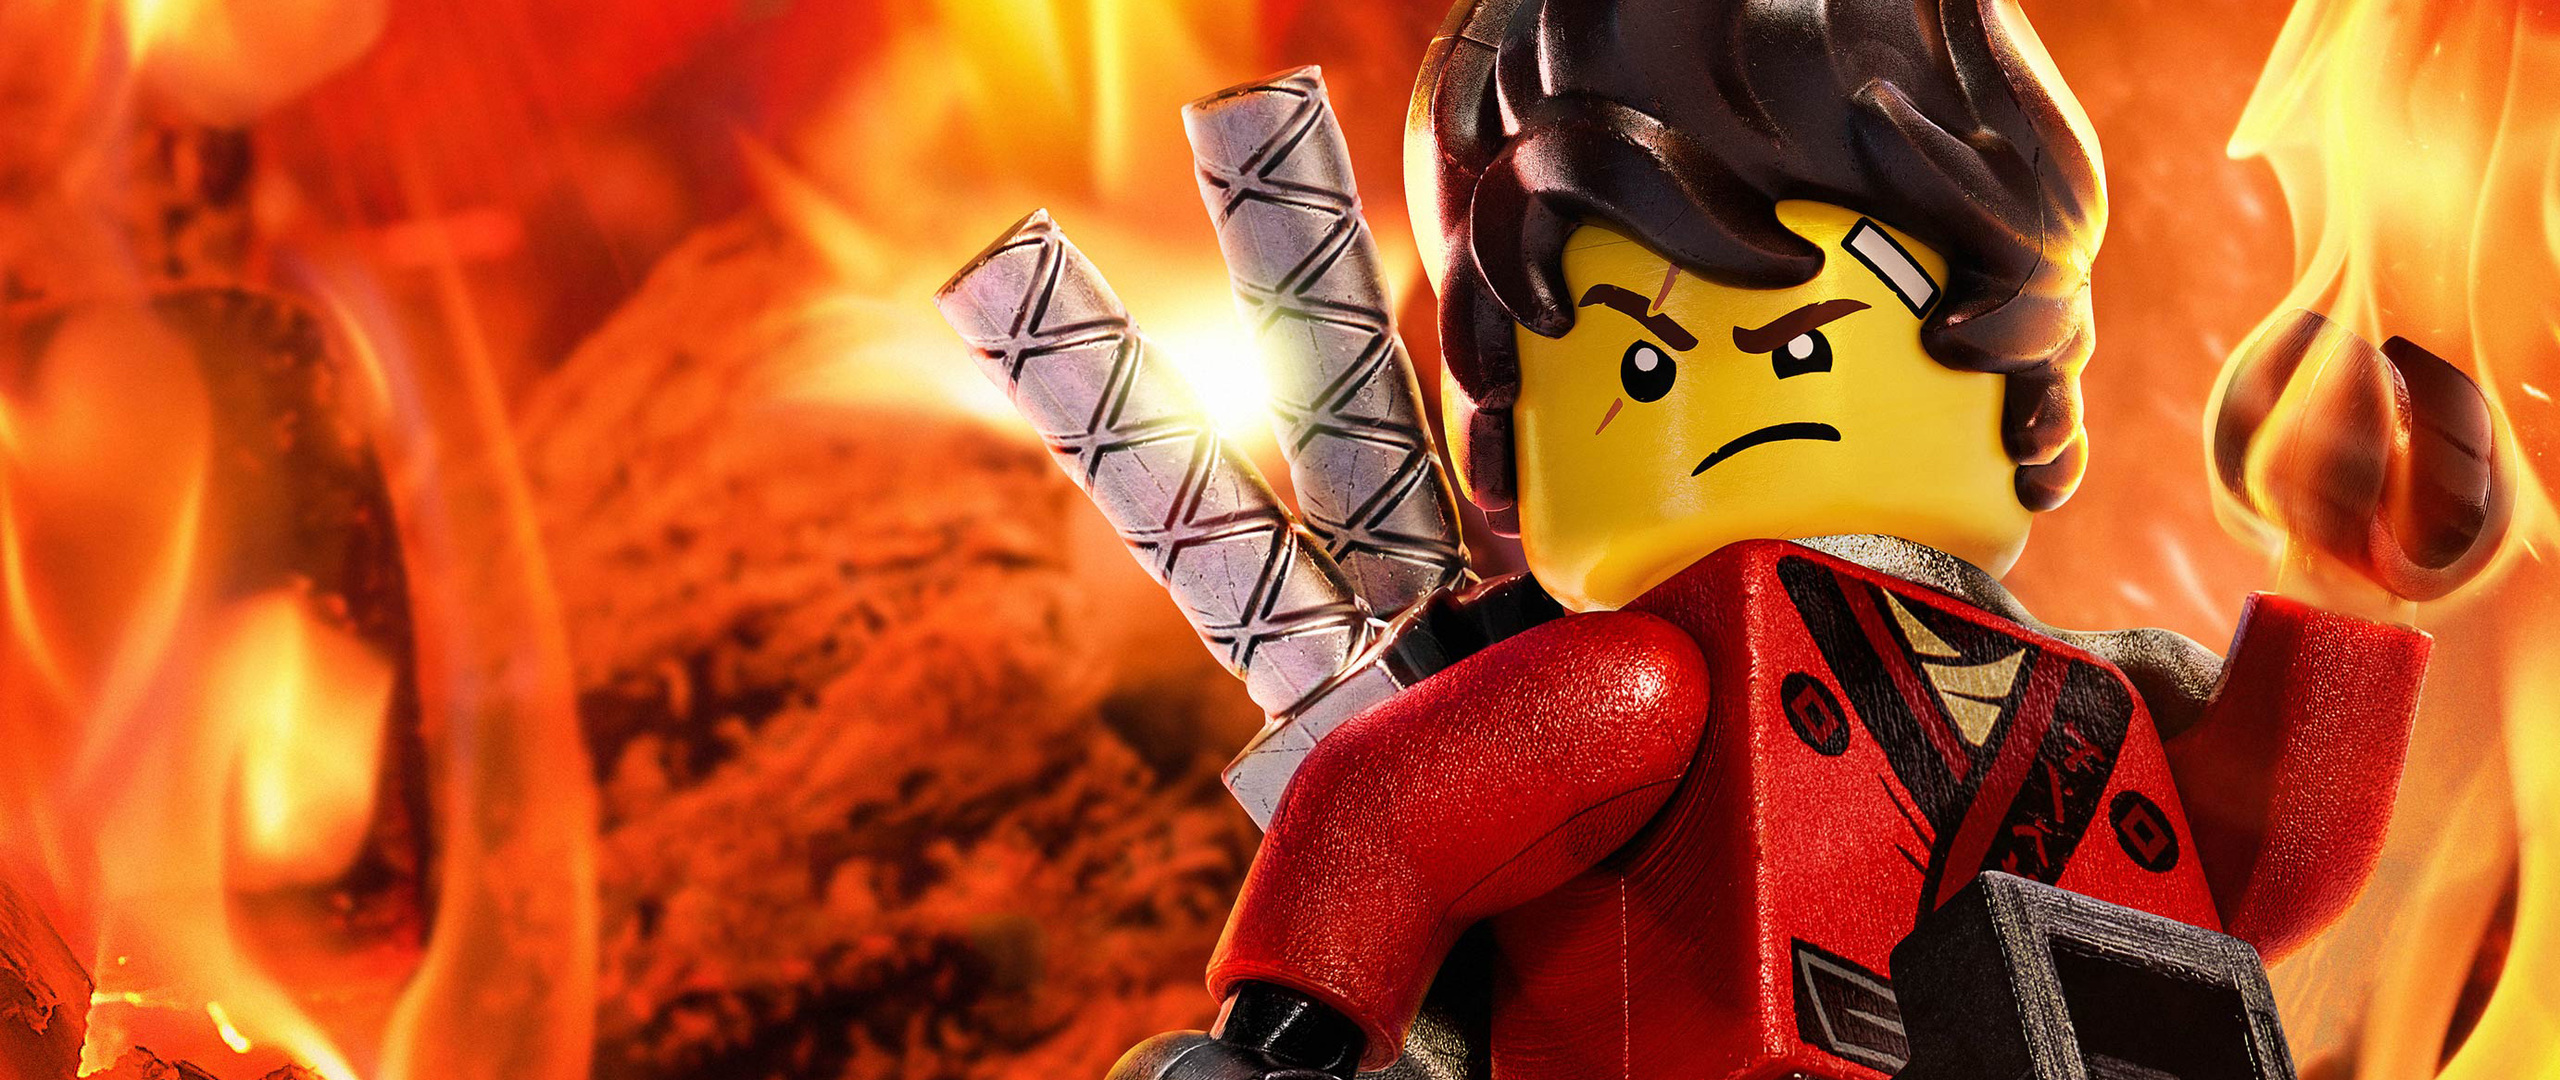 movies-wallpapers. hd-wallpapers. animated-movies-wallpapers. the-lego-ninj...